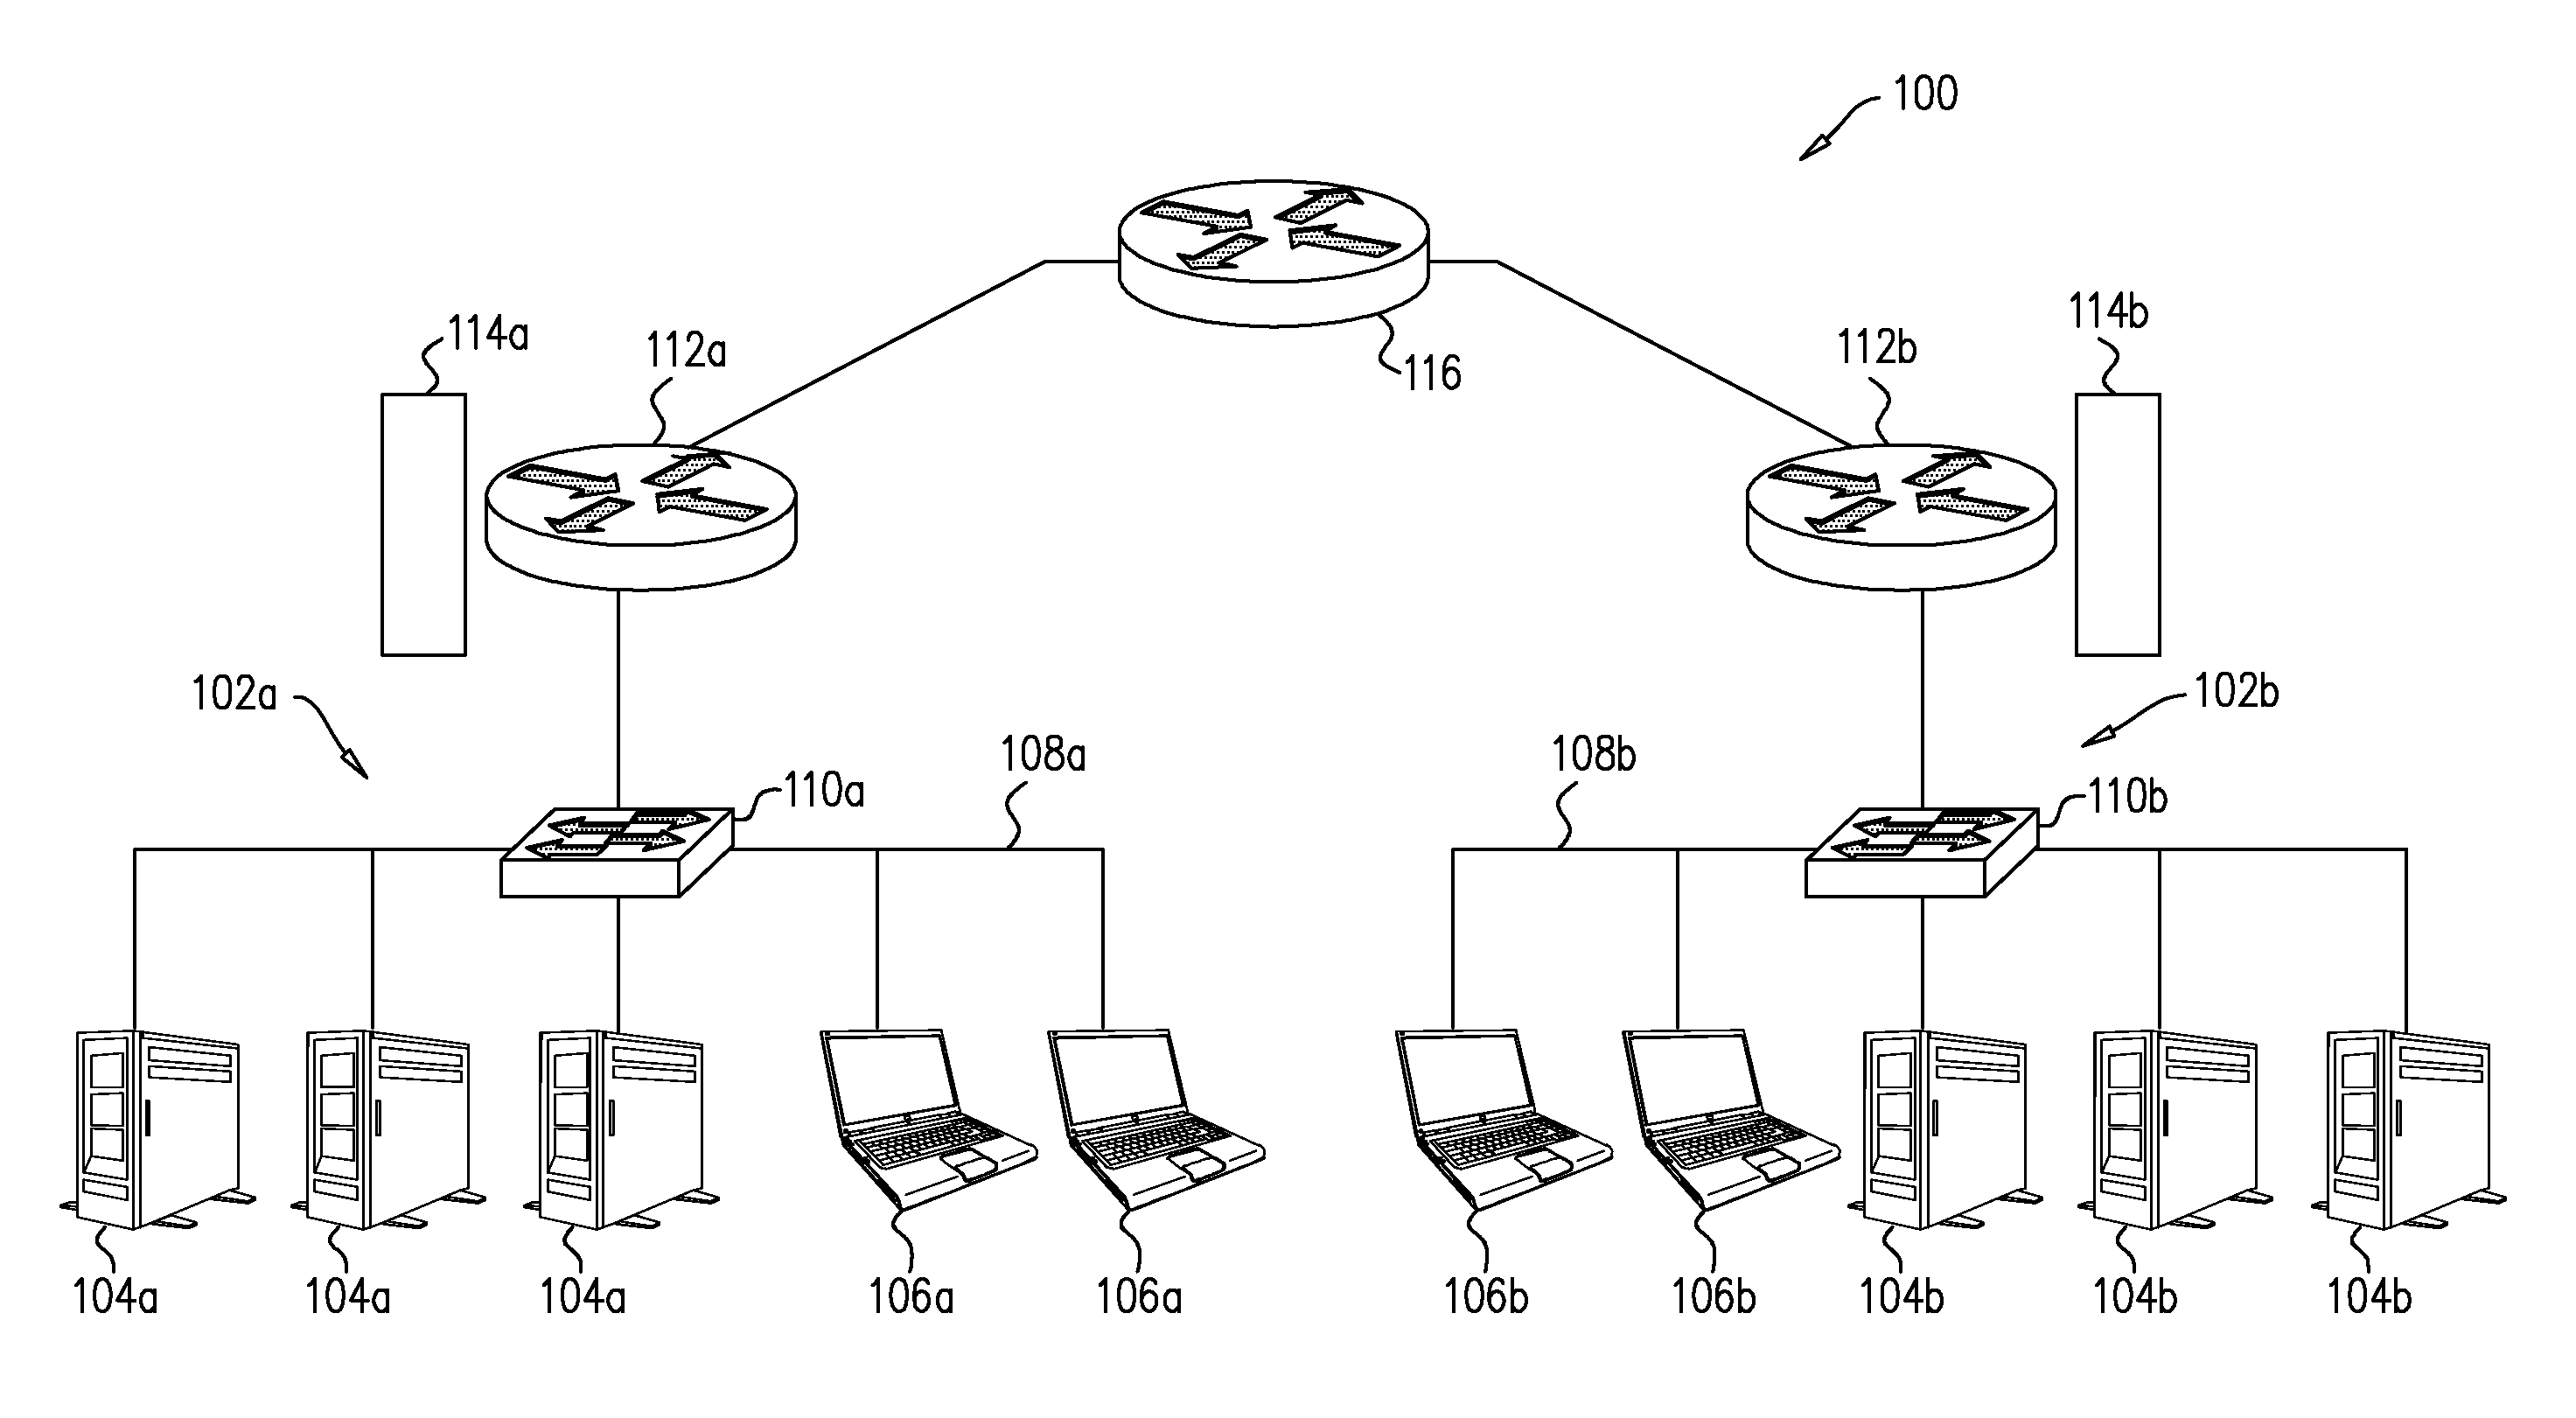 System and a Method for Identifying Malware Network Activity Using a Decoy Environment